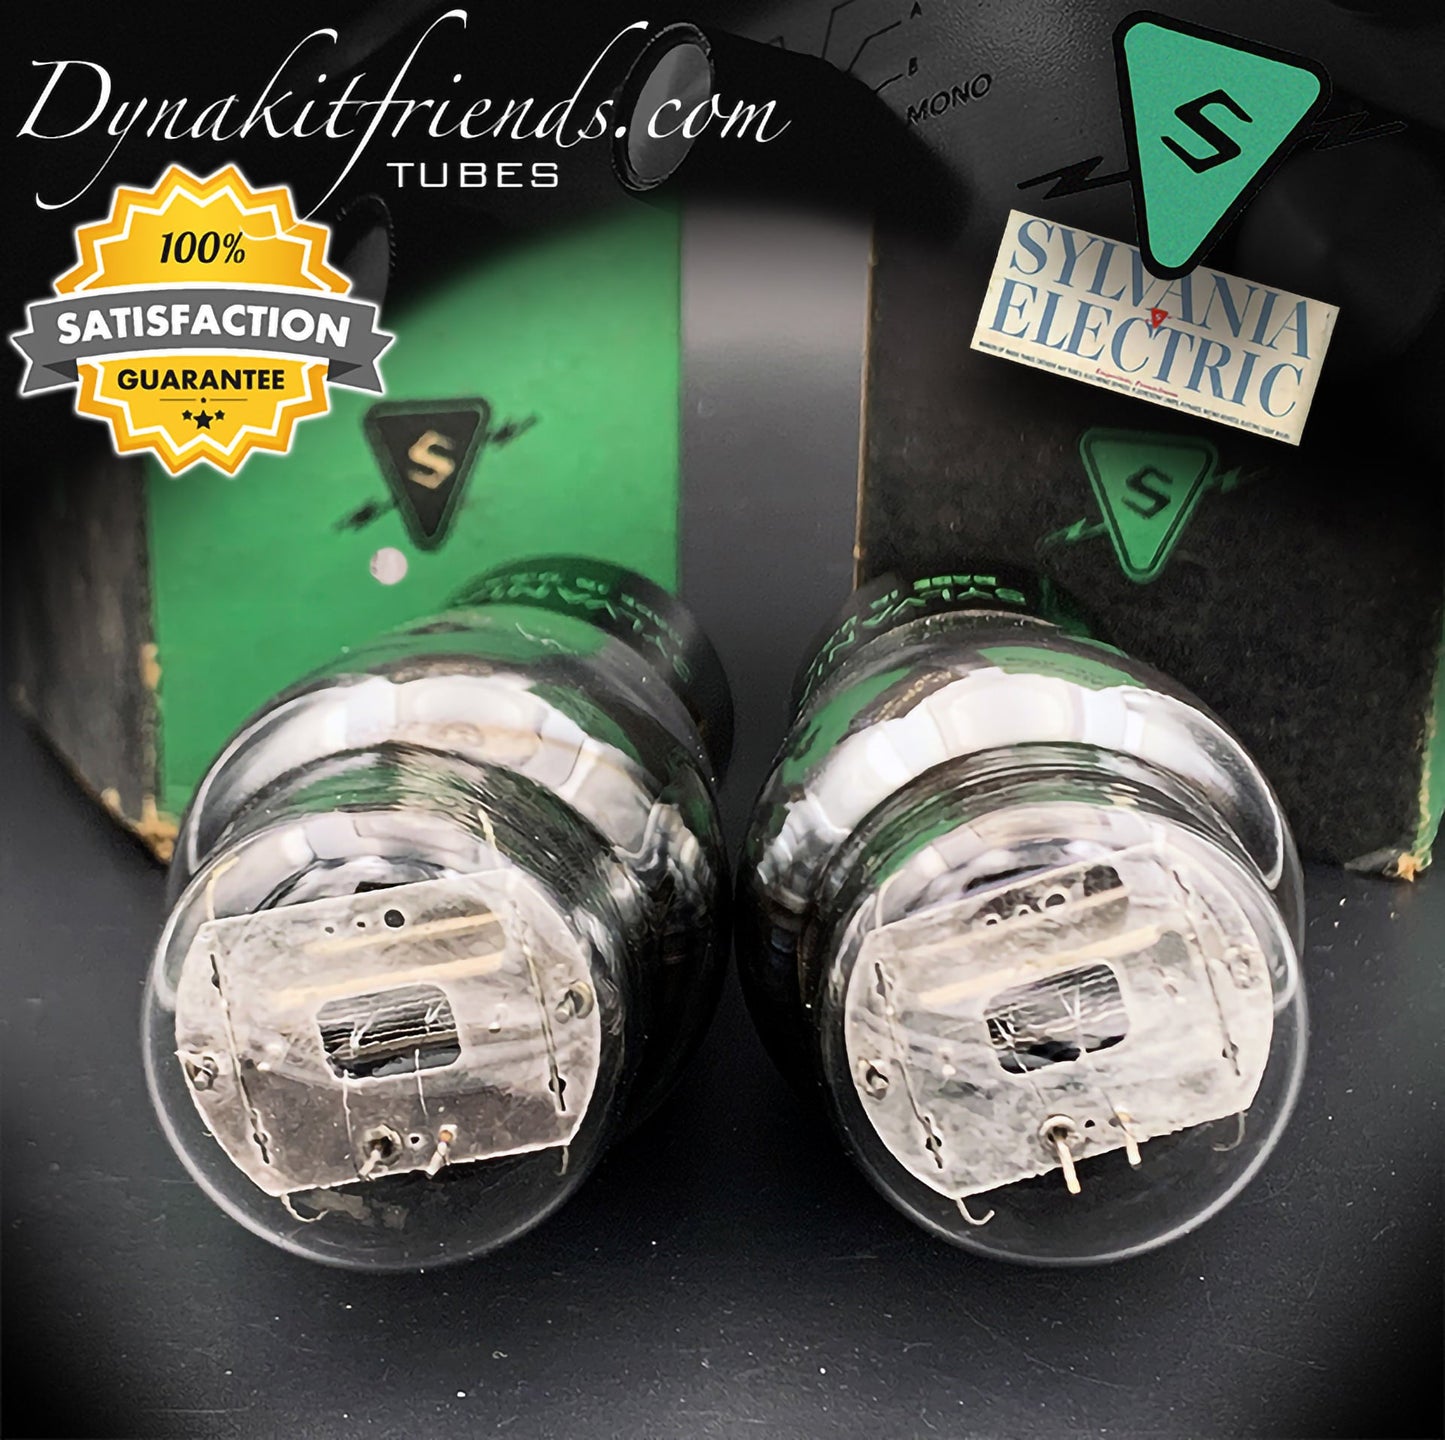 71A ST NOS NIB SYLVANIA Power Triode Matched Pair Tubes Made In USA 1947